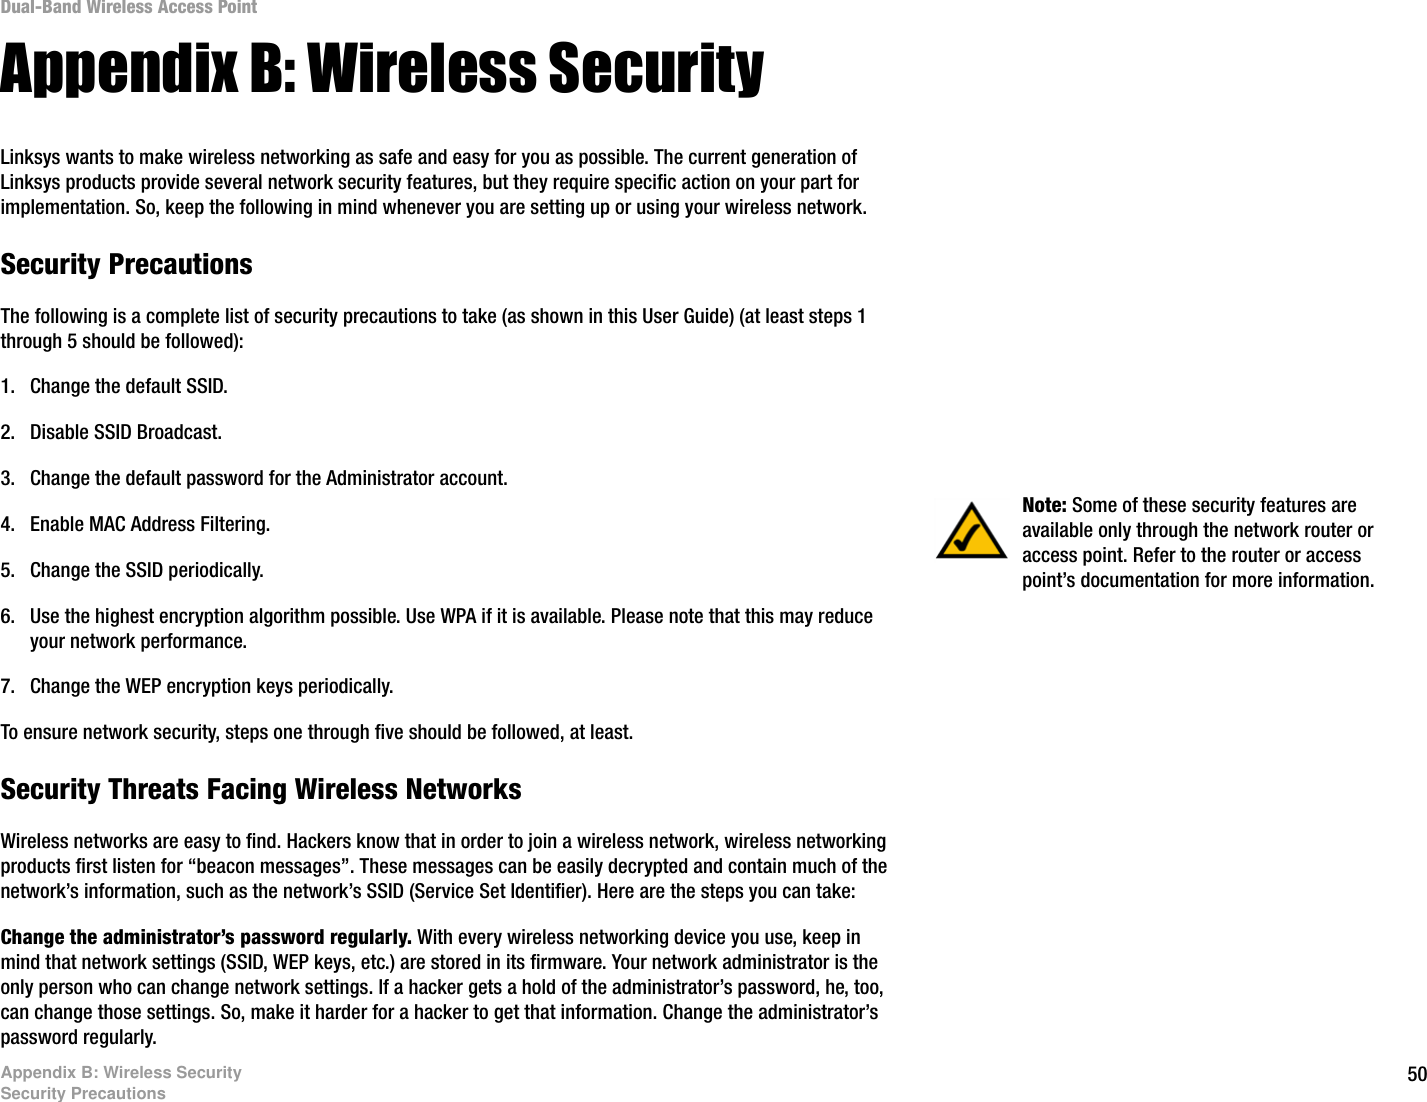 50Appendix B: Wireless SecuritySecurity PrecautionsDual-Band Wireless Access PointAppendix B: Wireless SecurityLinksys wants to make wireless networking as safe and easy for you as possible. The current generation of Linksys products provide several network security features, but they require specific action on your part for implementation. So, keep the following in mind whenever you are setting up or using your wireless network.Security PrecautionsThe following is a complete list of security precautions to take (as shown in this User Guide) (at least steps 1 through 5 should be followed):1. Change the default SSID. 2. Disable SSID Broadcast. 3. Change the default password for the Administrator account. 4. Enable MAC Address Filtering. 5. Change the SSID periodically. 6. Use the highest encryption algorithm possible. Use WPA if it is available. Please note that this may reduce your network performance. 7. Change the WEP encryption keys periodically. To ensure network security, steps one through five should be followed, at least.Security Threats Facing Wireless Networks Wireless networks are easy to find. Hackers know that in order to join a wireless network, wireless networking products first listen for “beacon messages”. These messages can be easily decrypted and contain much of the network’s information, such as the network’s SSID (Service Set Identifier). Here are the steps you can take:Change the administrator’s password regularly. With every wireless networking device you use, keep in mind that network settings (SSID, WEP keys, etc.) are stored in its firmware. Your network administrator is the only person who can change network settings. If a hacker gets a hold of the administrator’s password, he, too, can change those settings. So, make it harder for a hacker to get that information. Change the administrator’s password regularly.Note: Some of these security features are available only through the network router or access point. Refer to the router or access point’s documentation for more information.